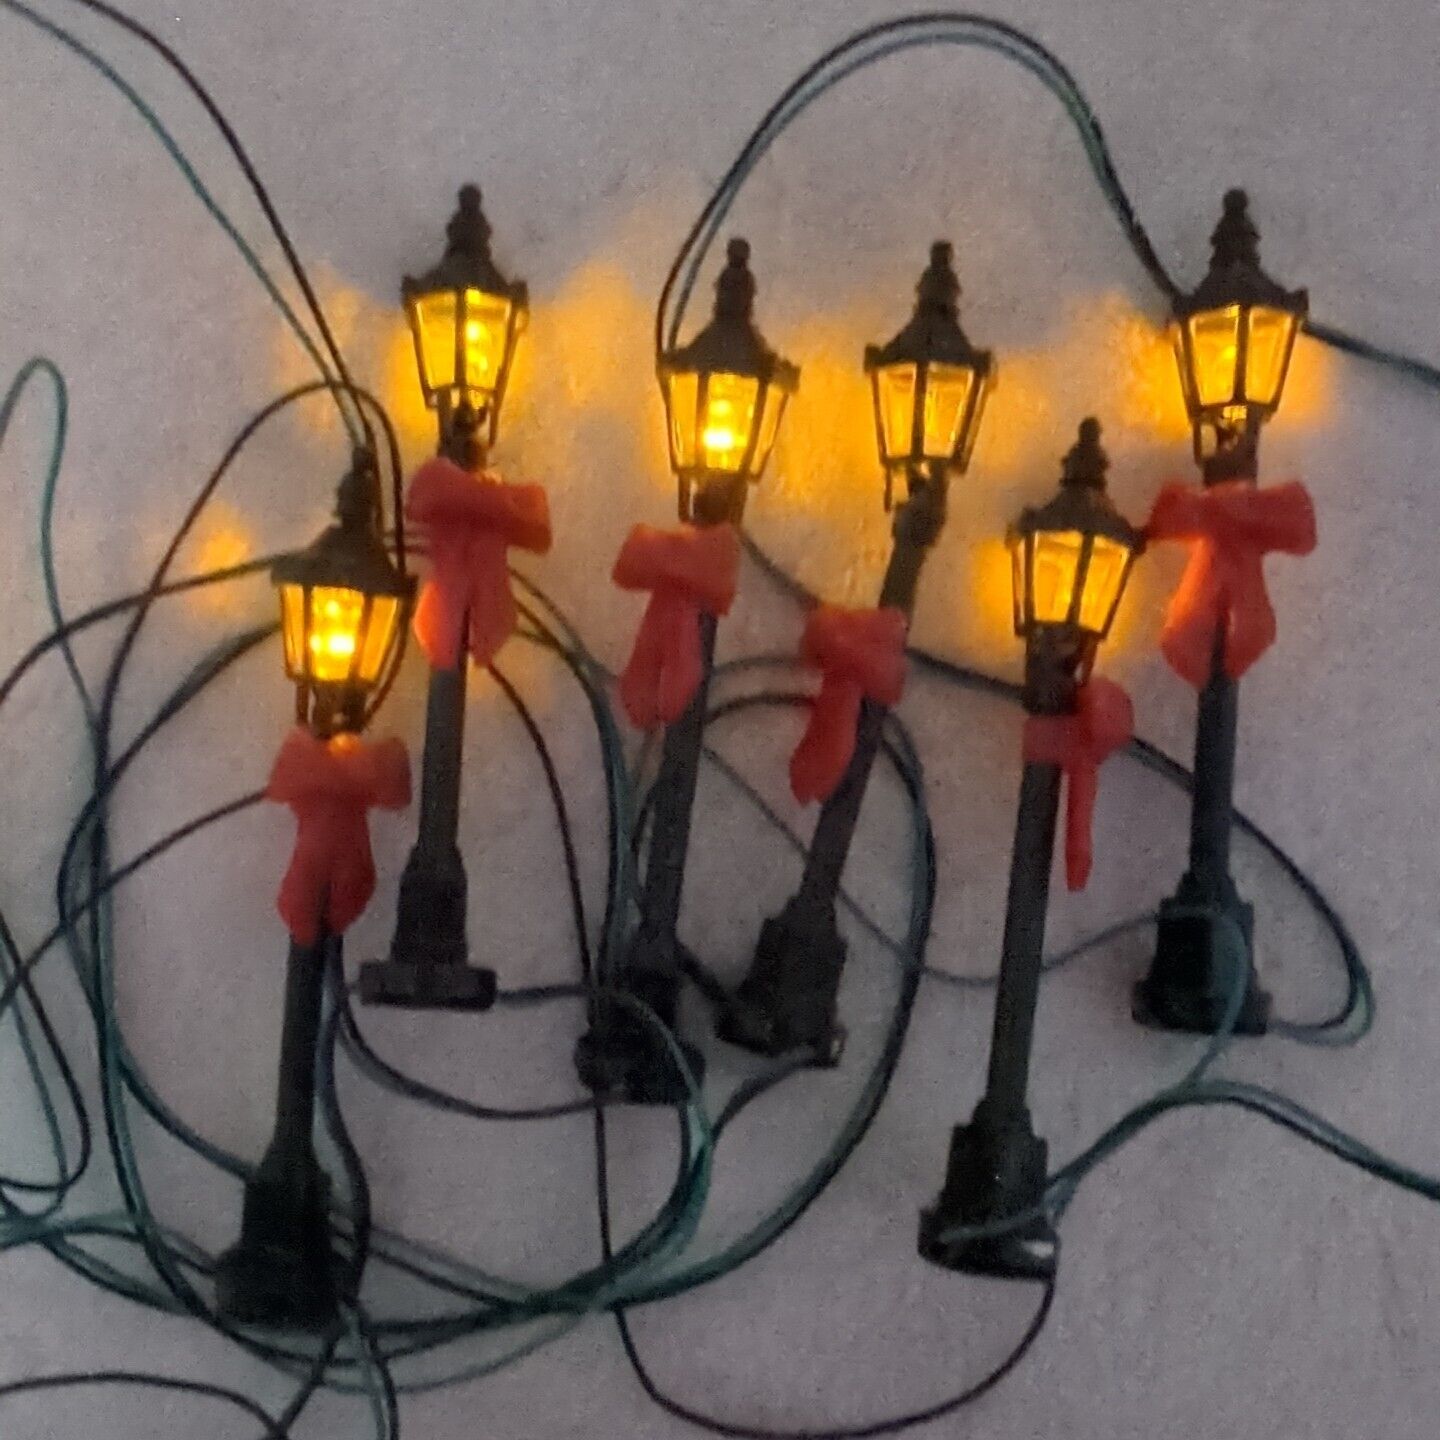 Christmas Village Street Lamp String Lights w/Red Bows Set of 6 Battery Operated